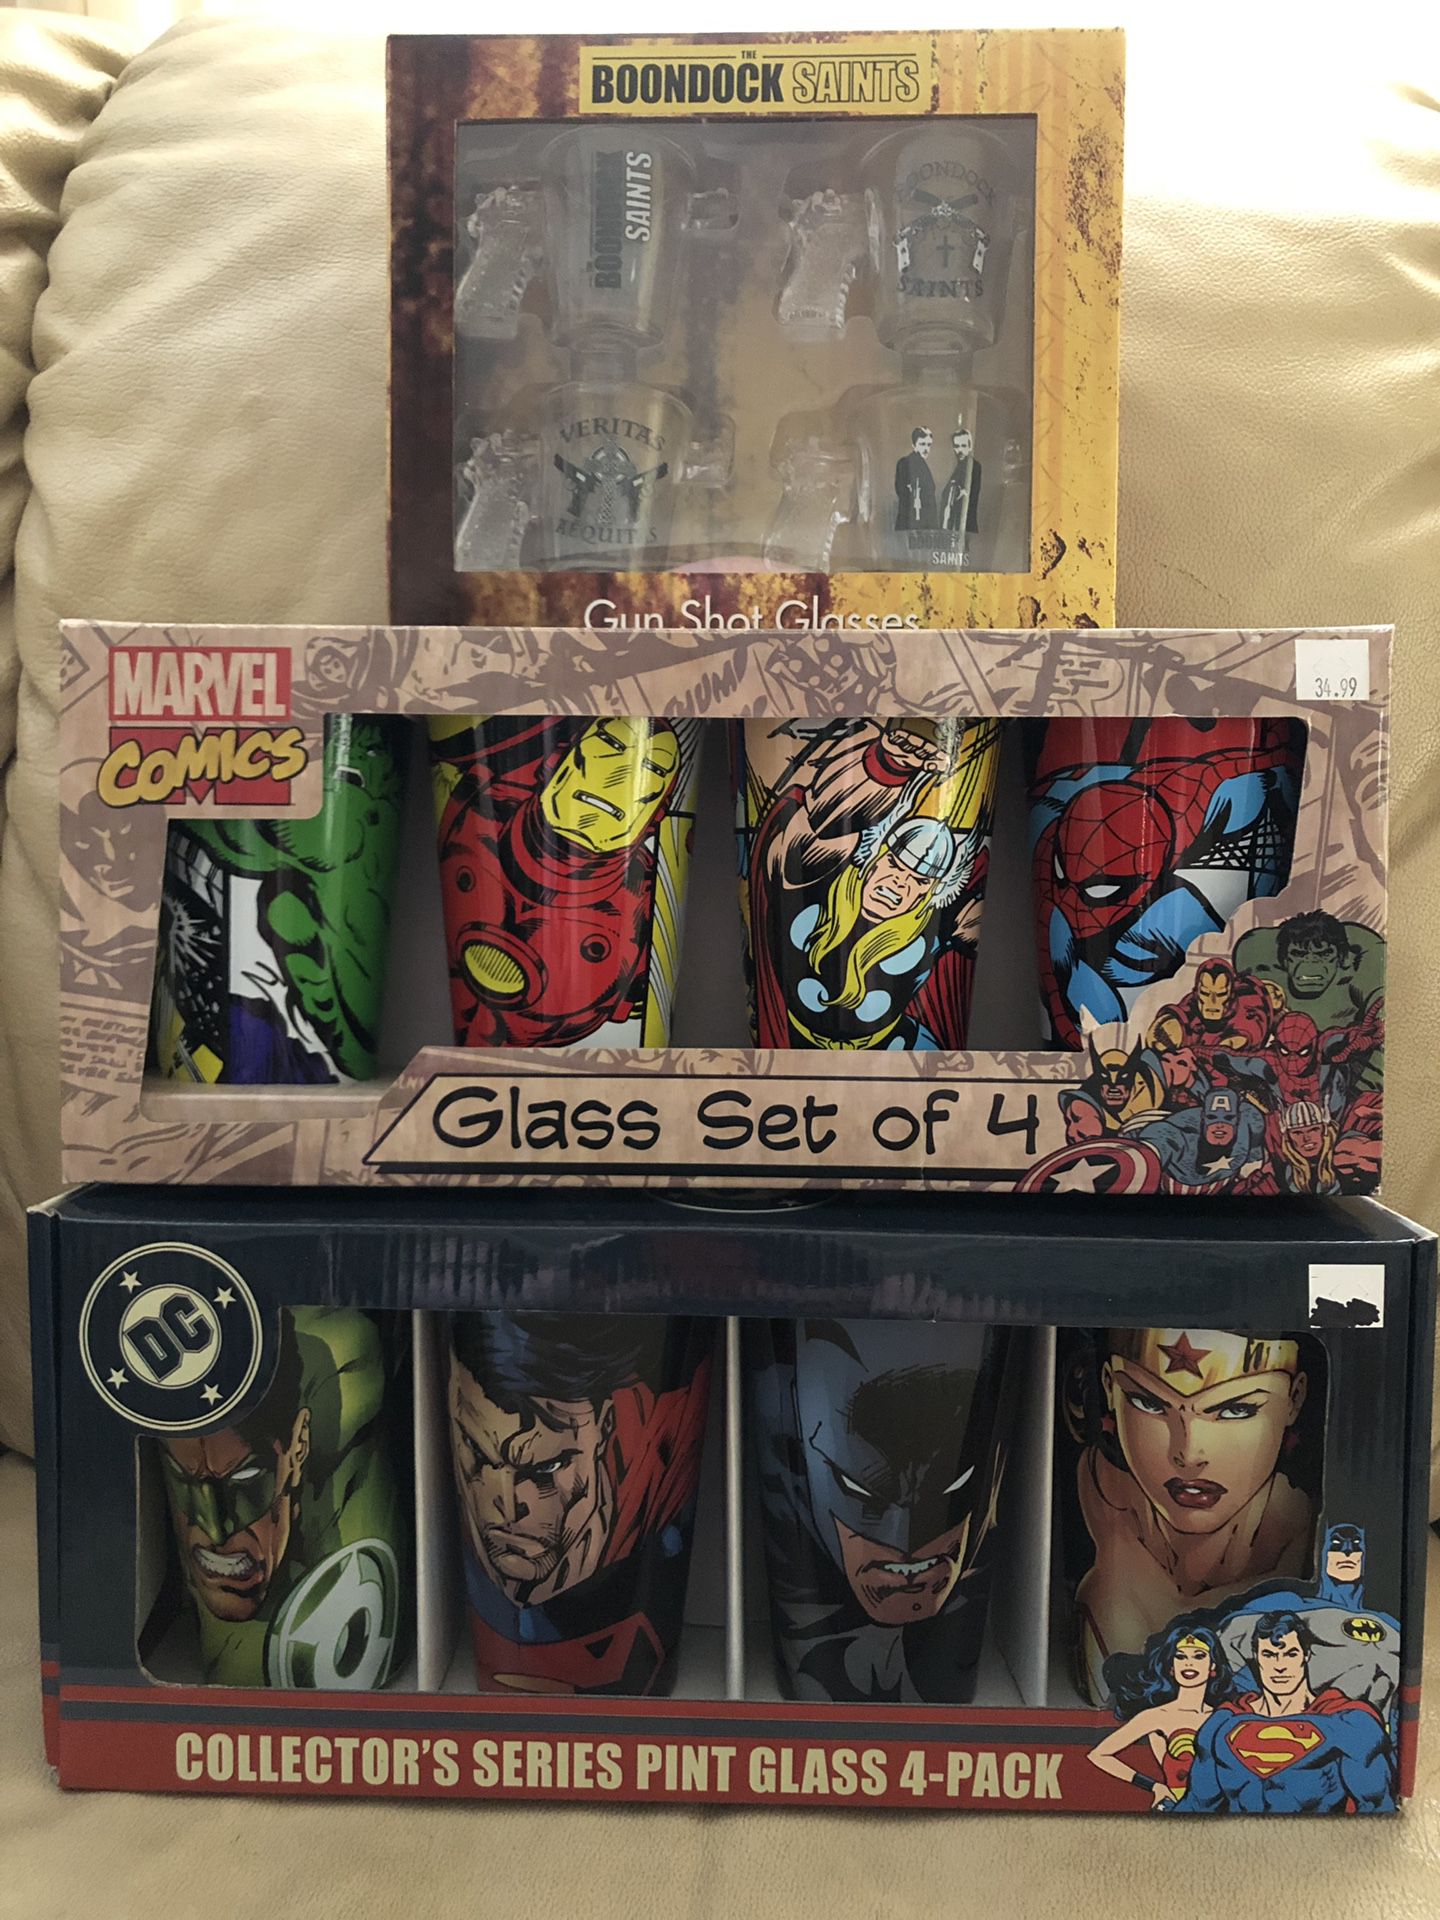 Marvel and DC comic pint glass sets. Also Shot glass set.